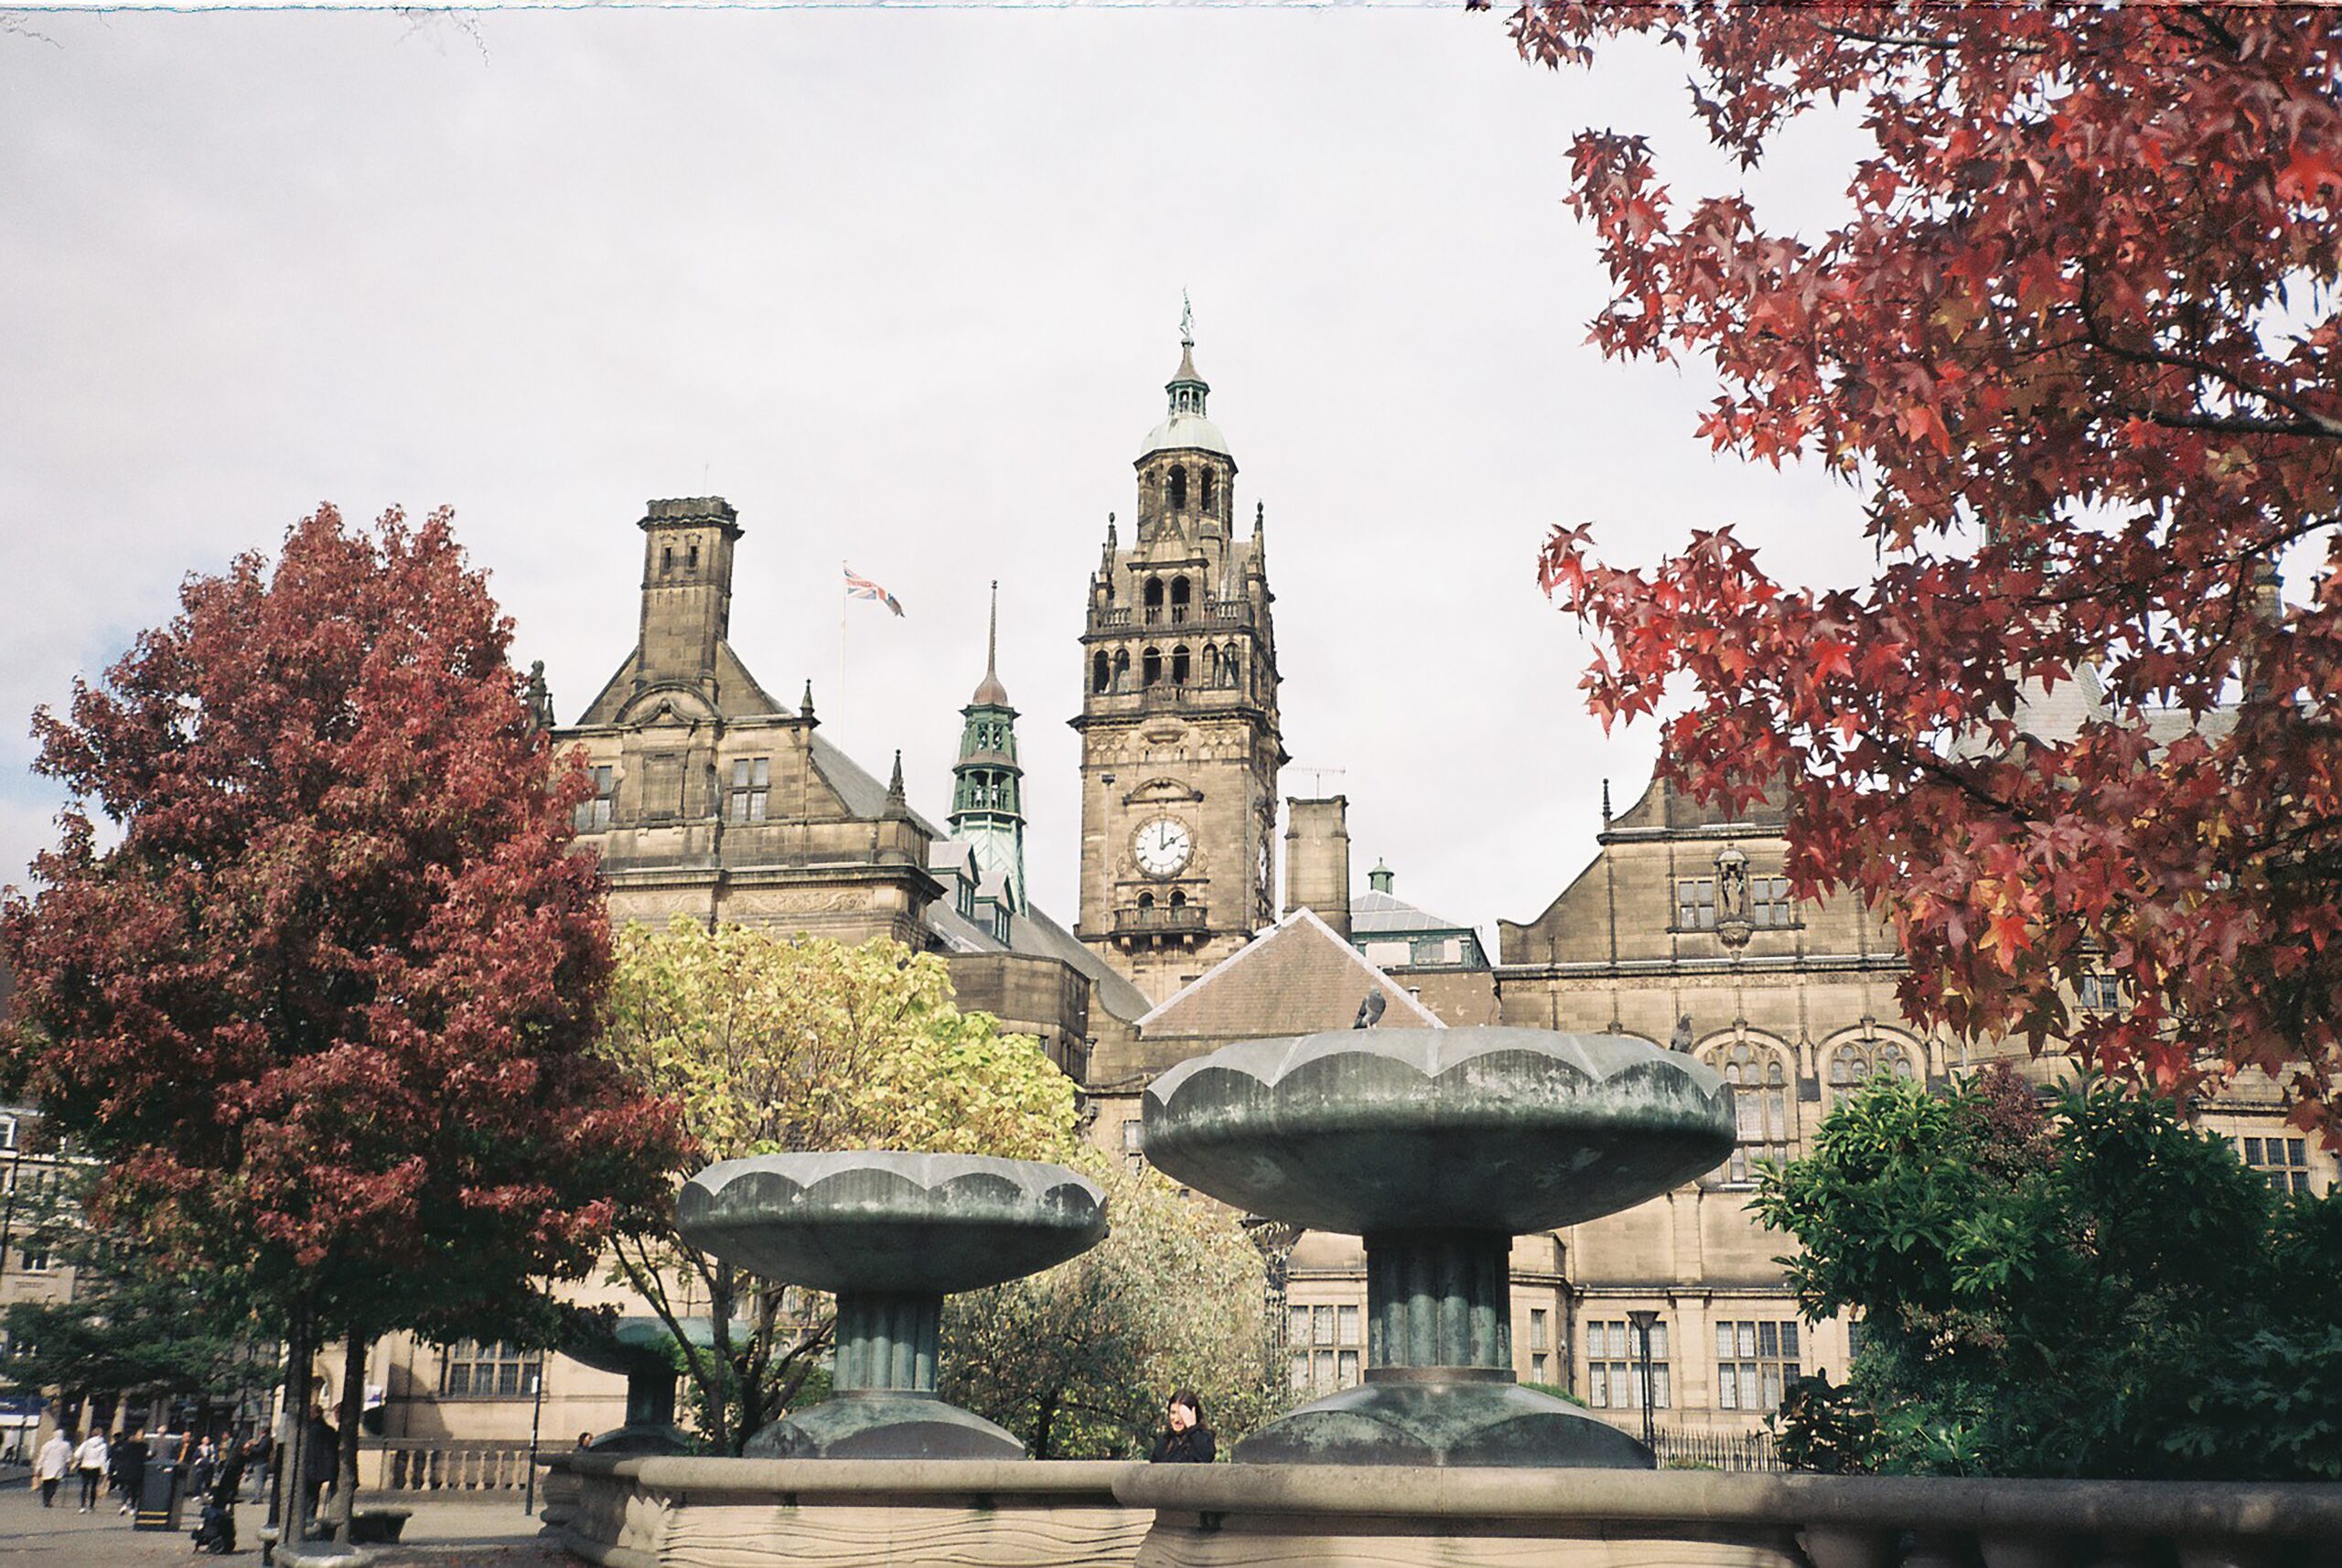 Sheffield view of grand town hall building